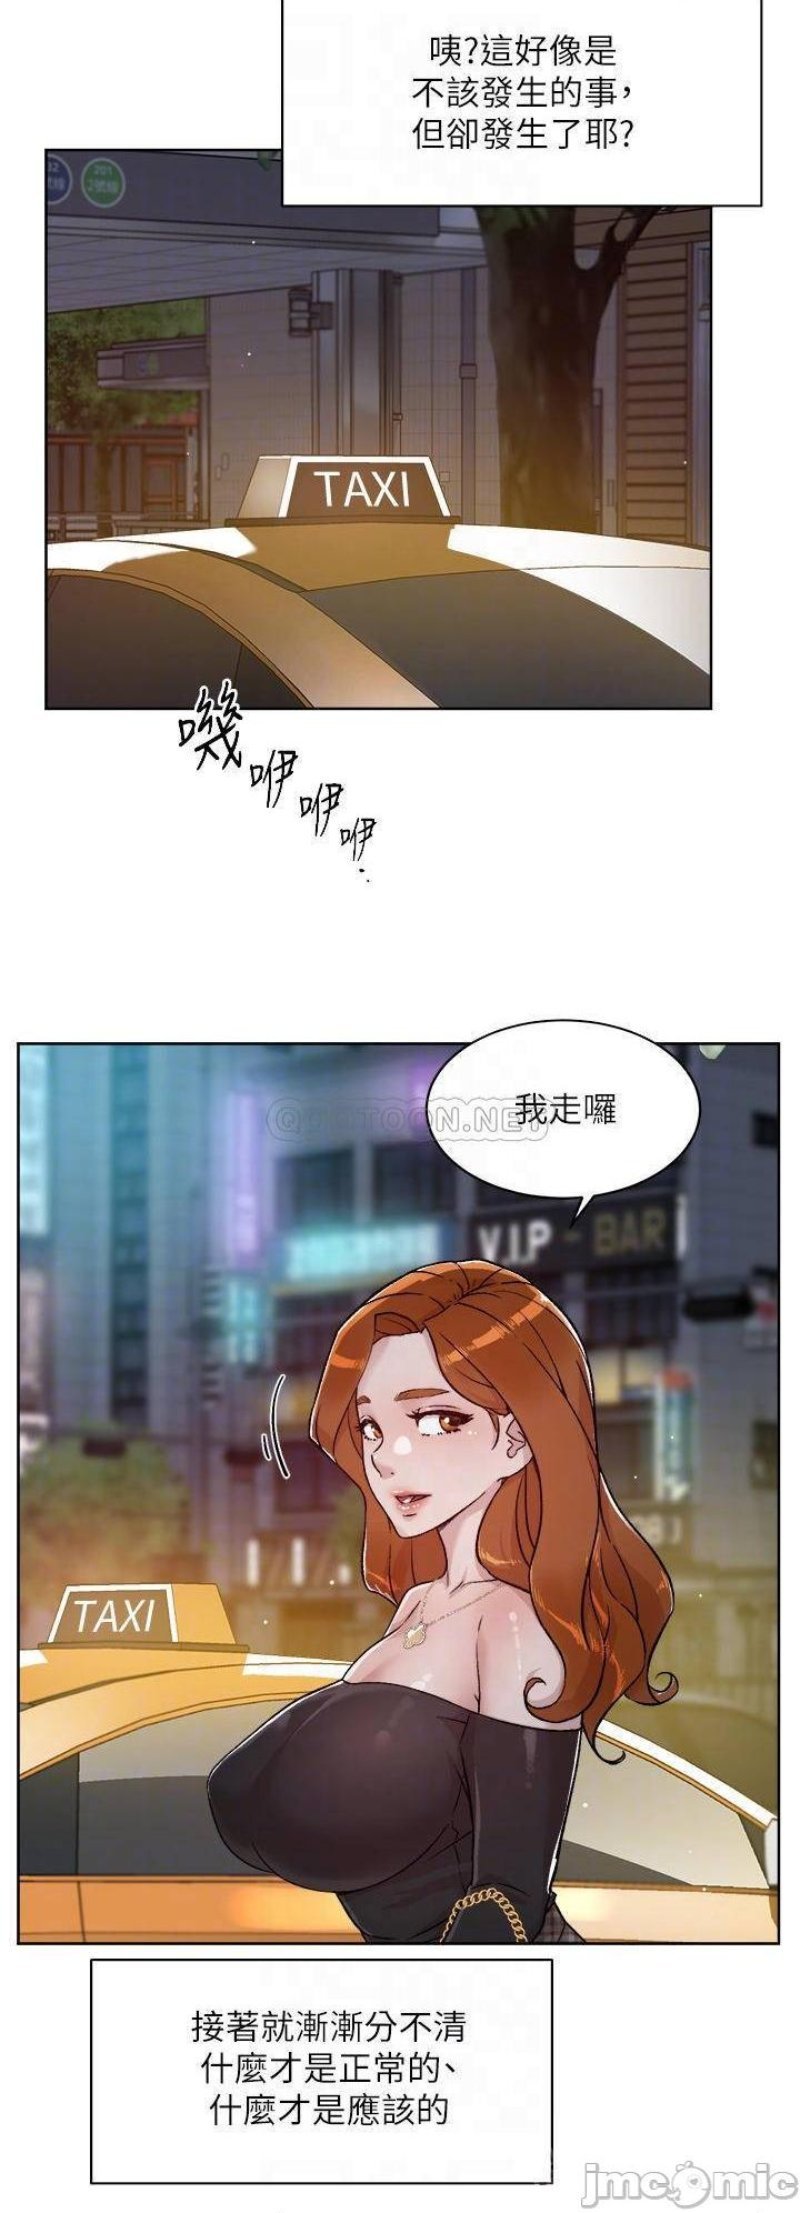 everything-about-best-friend-raw-chap-39-3